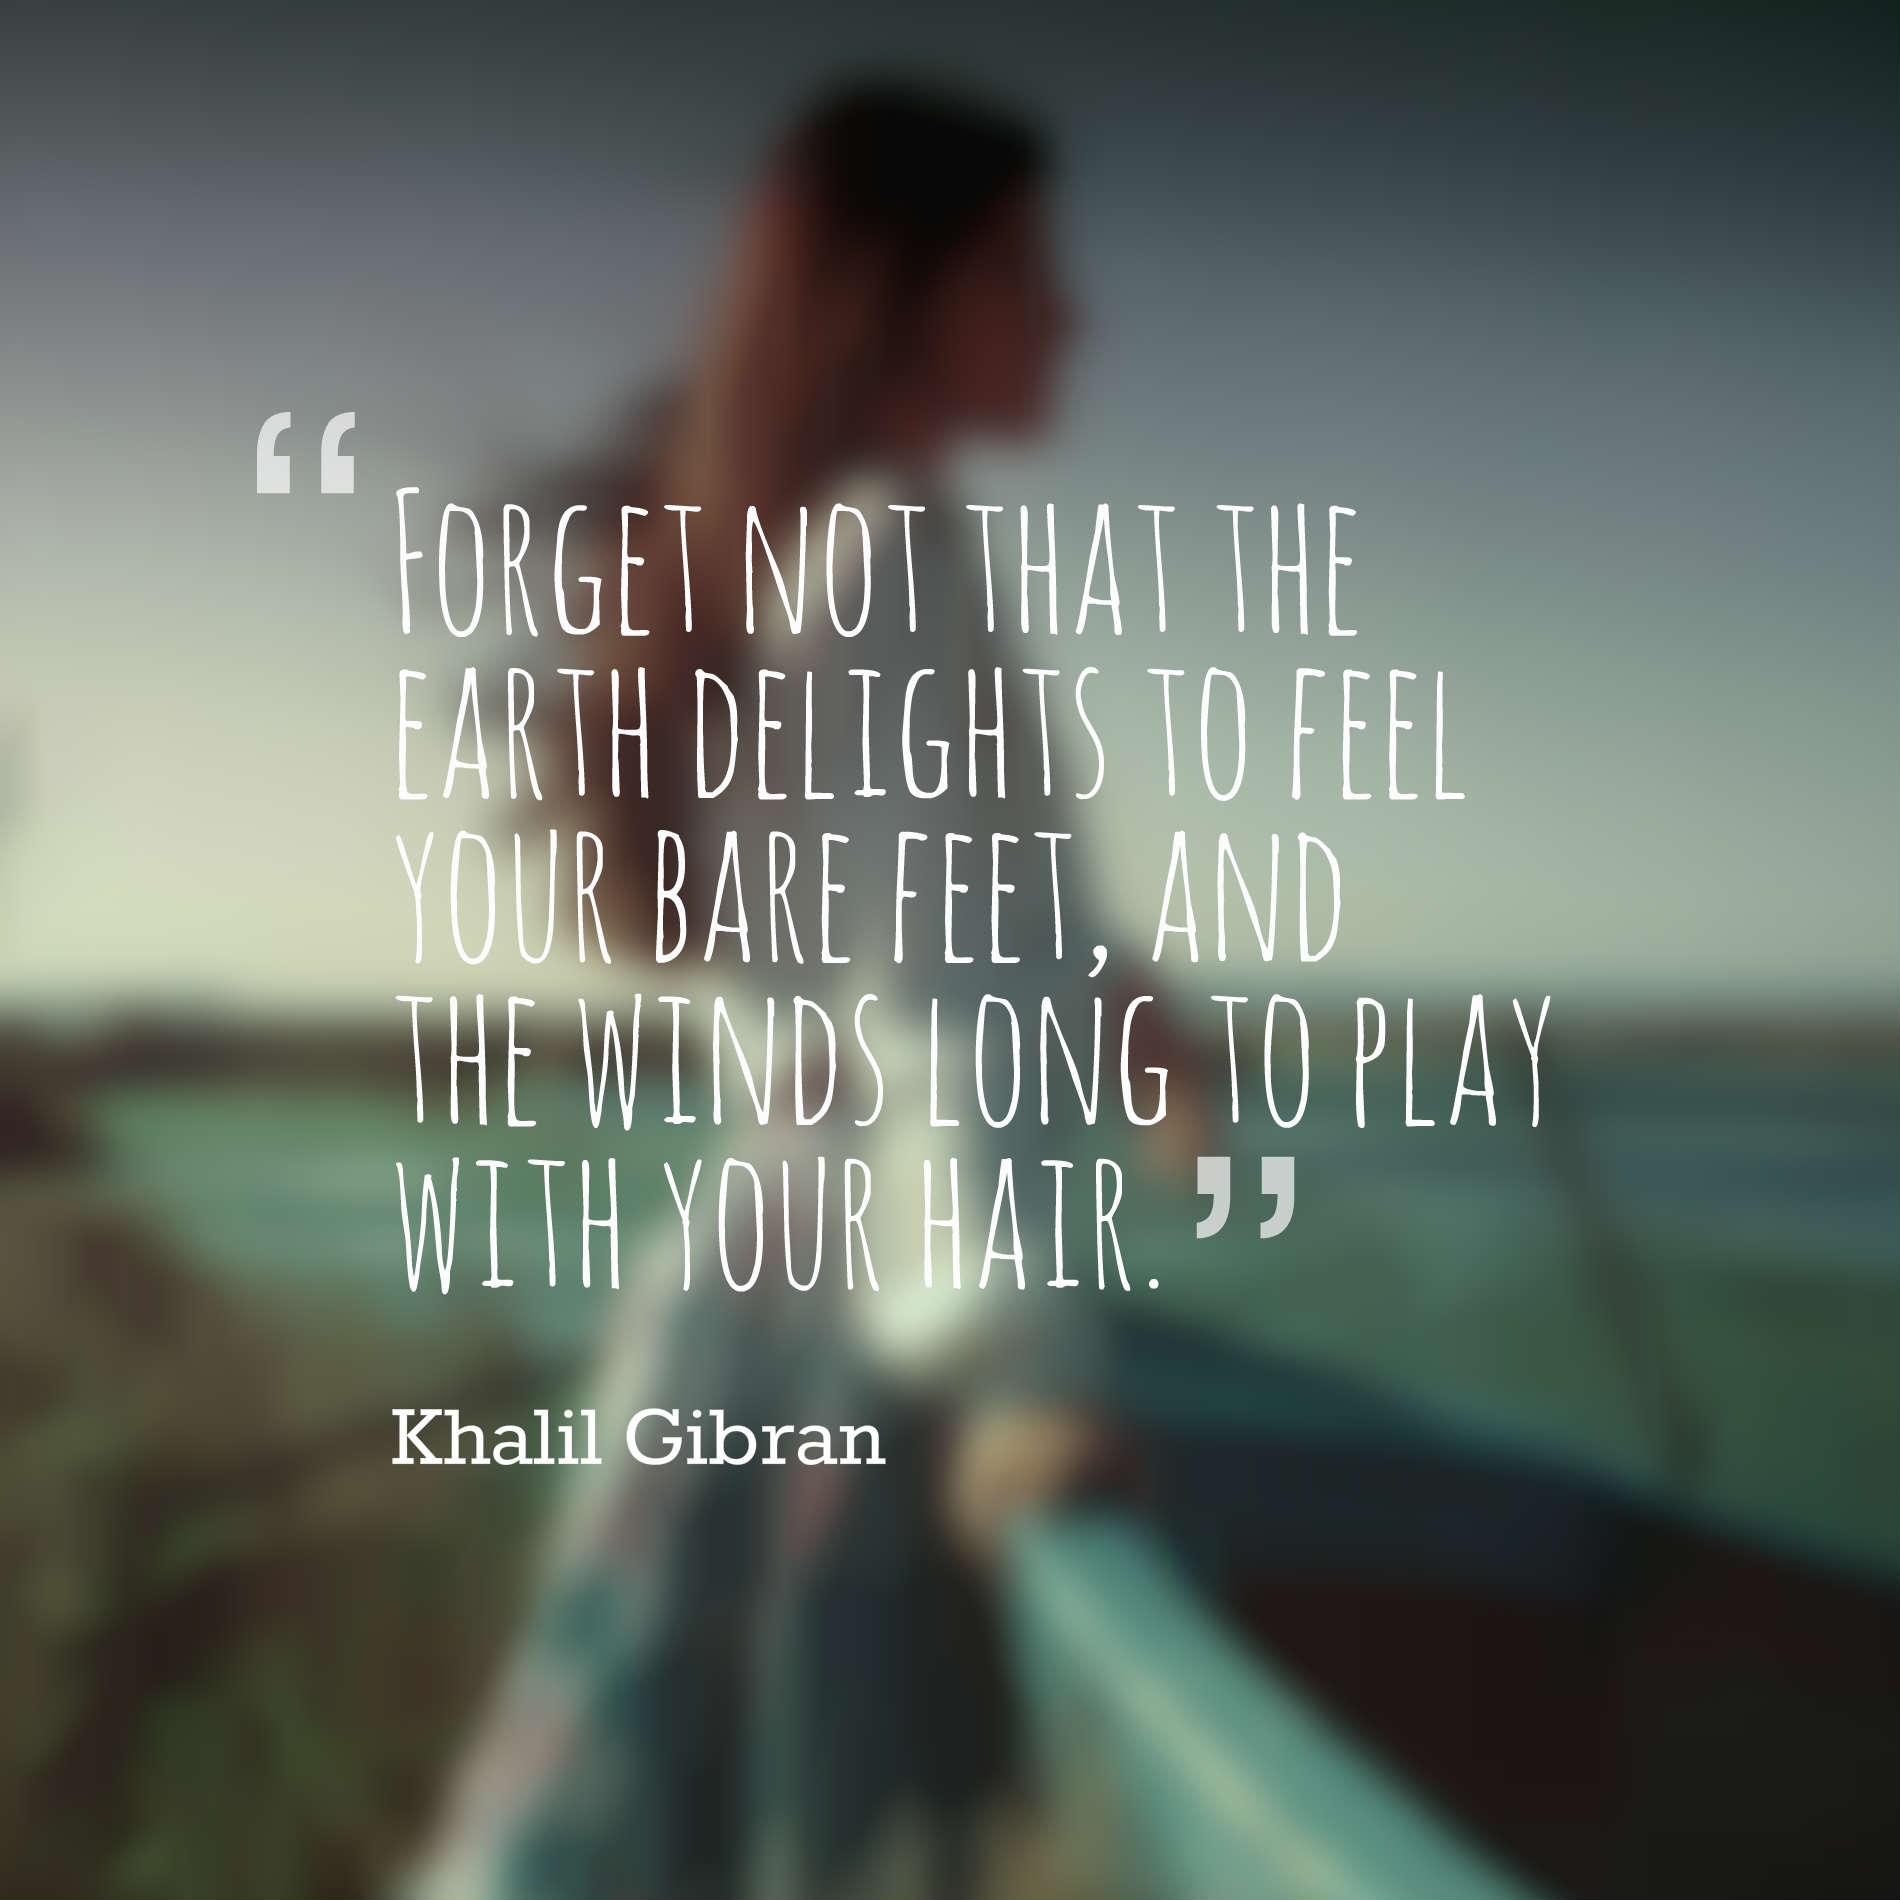 Forget not that the earth delights to feel your bare feet, and the winds long to play with your hair.